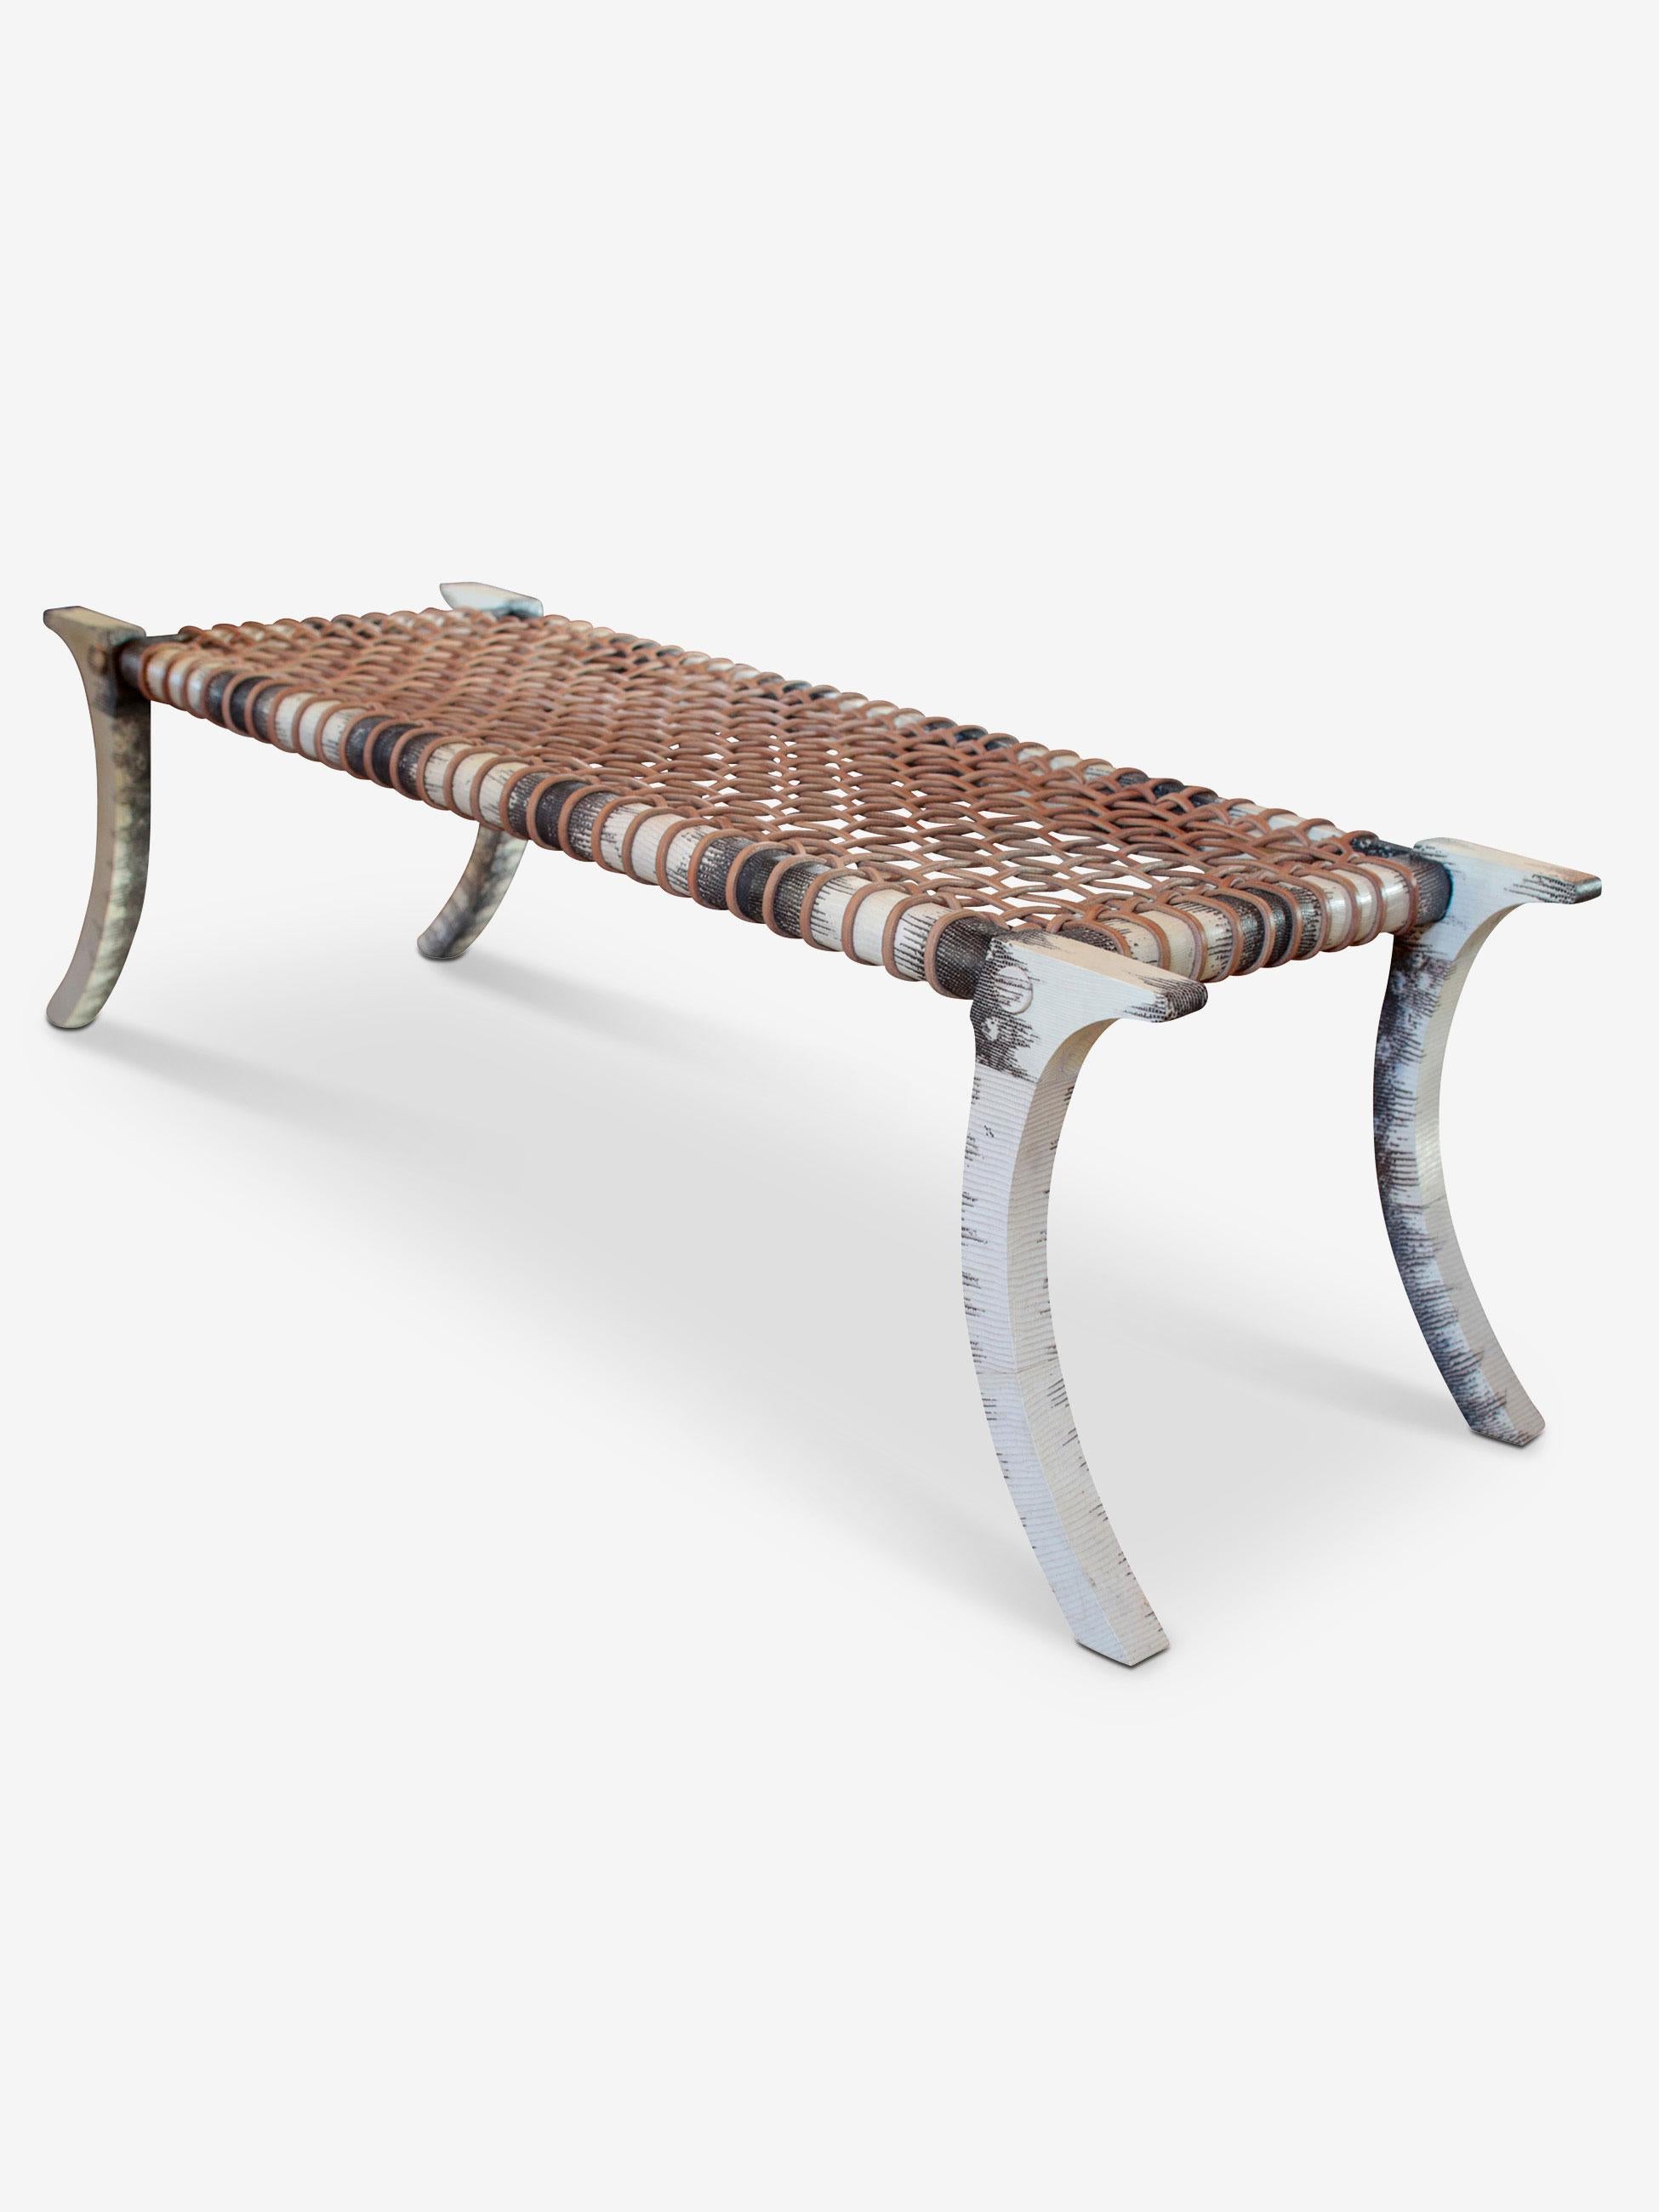 Stunning Klismos bench inspired by Robsjohn-Gibbings in lizard skin and natural calf leather straps.